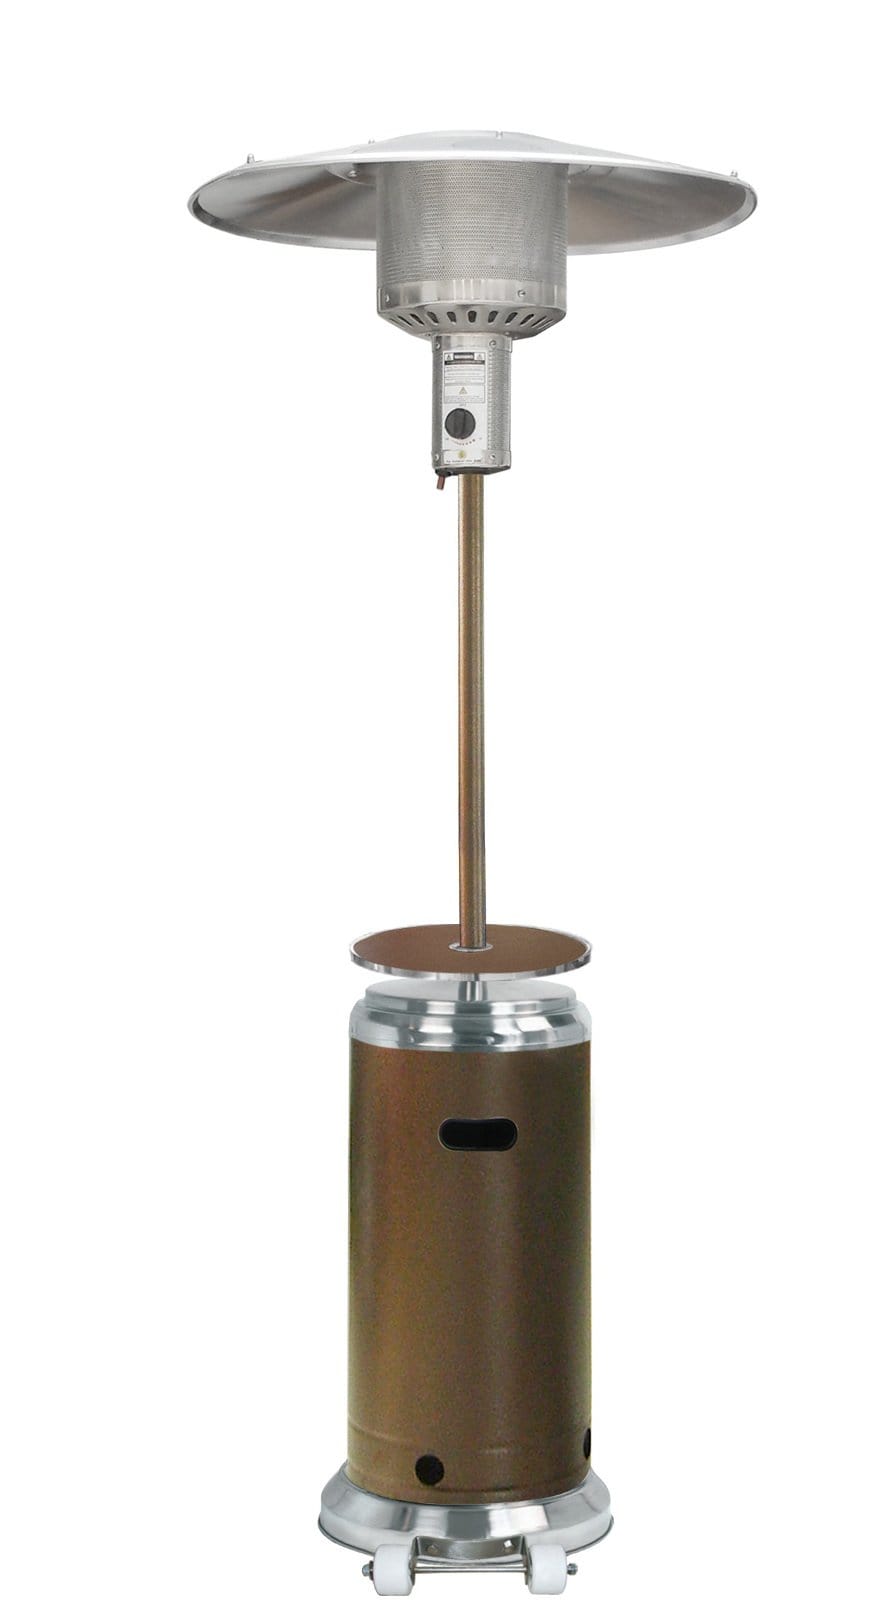 Hiland Parasol Patio Heaters Hiland Patio Heaters Outdoor Two-Toned Patio Heater in Stainless Steel and Hammered Bronze